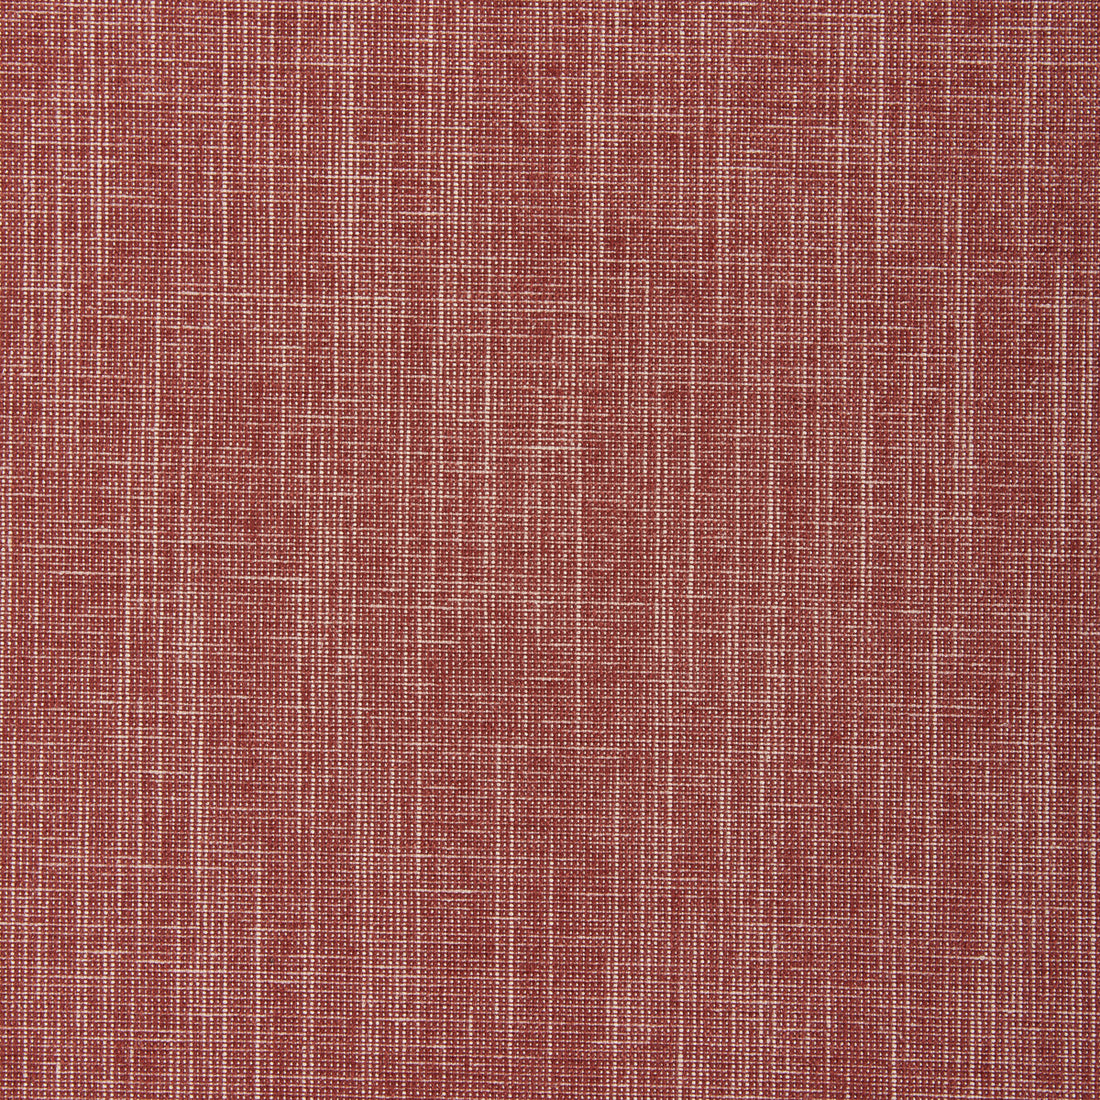 Kravet Smart fabric in 37078-19 color - pattern 37078.19.0 - by Kravet Smart in the Trio Textures collection